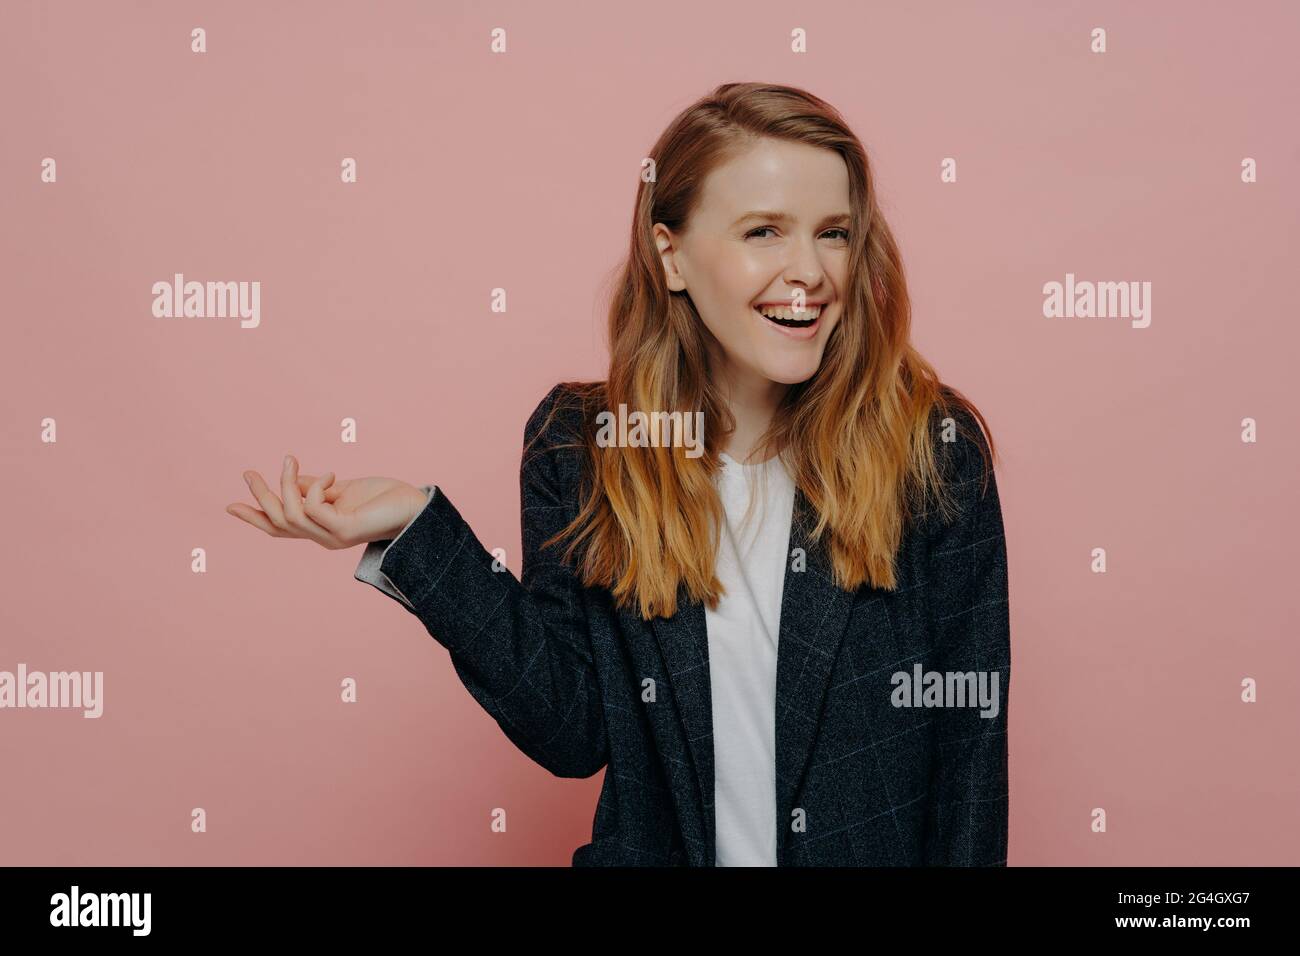 Laughing young woman with tipping hand shrugging shoulders Stock Photo